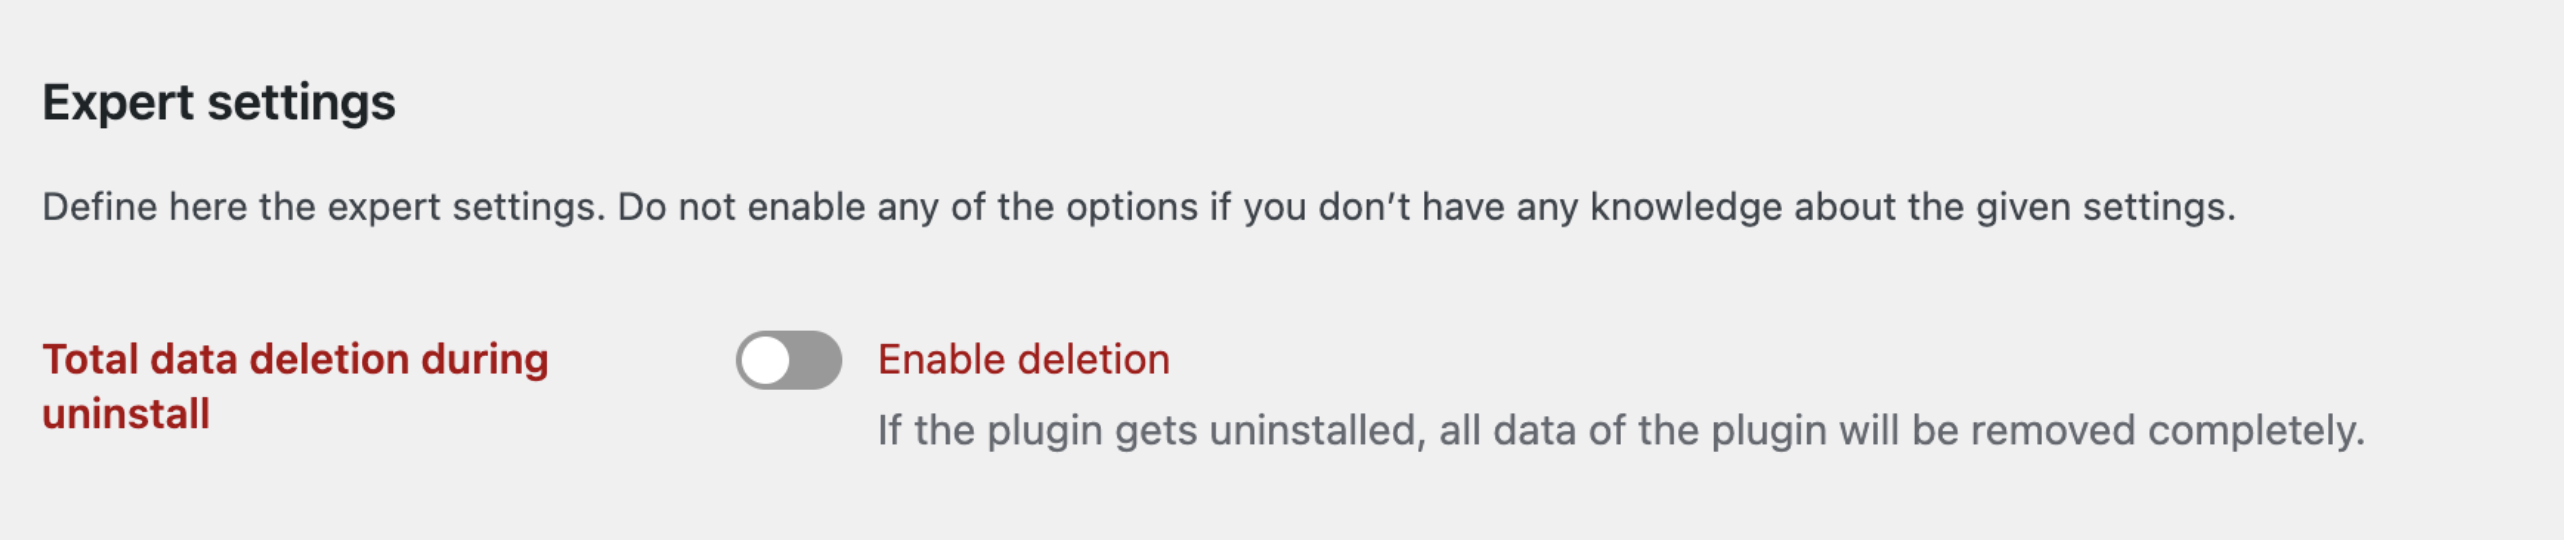 Total data deletion during uninstall